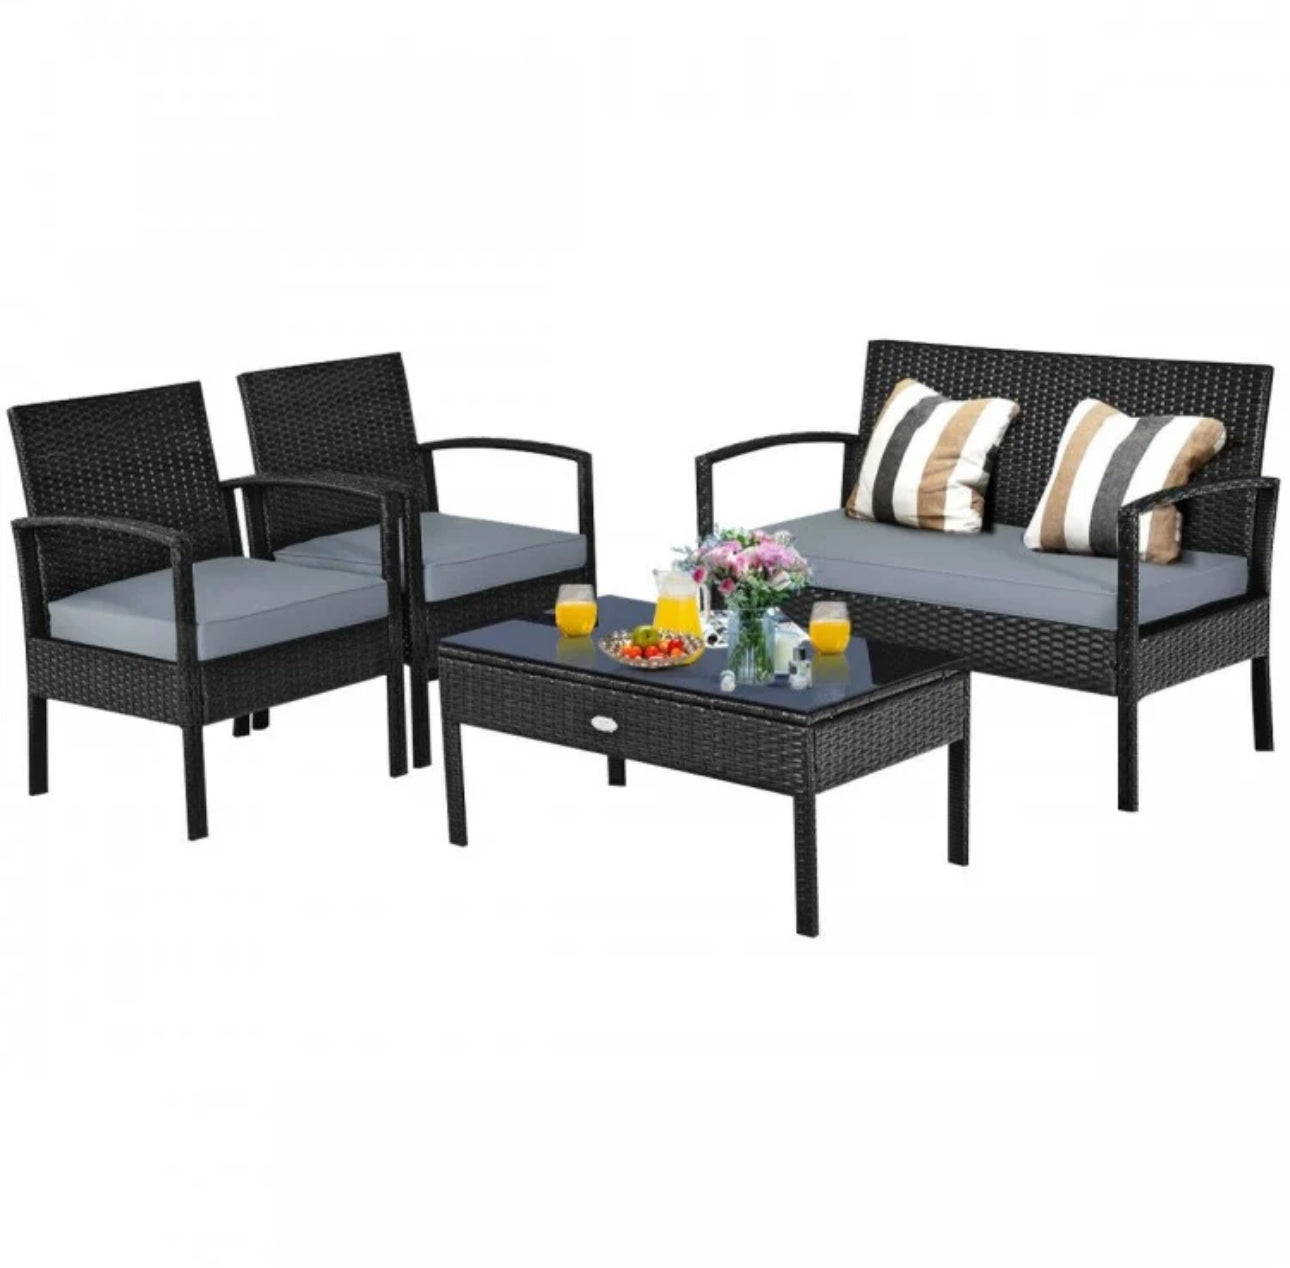 Very Relaxing & Elegant 4 Piece Patio Furniture Set Cushioned With Love Seat | Table